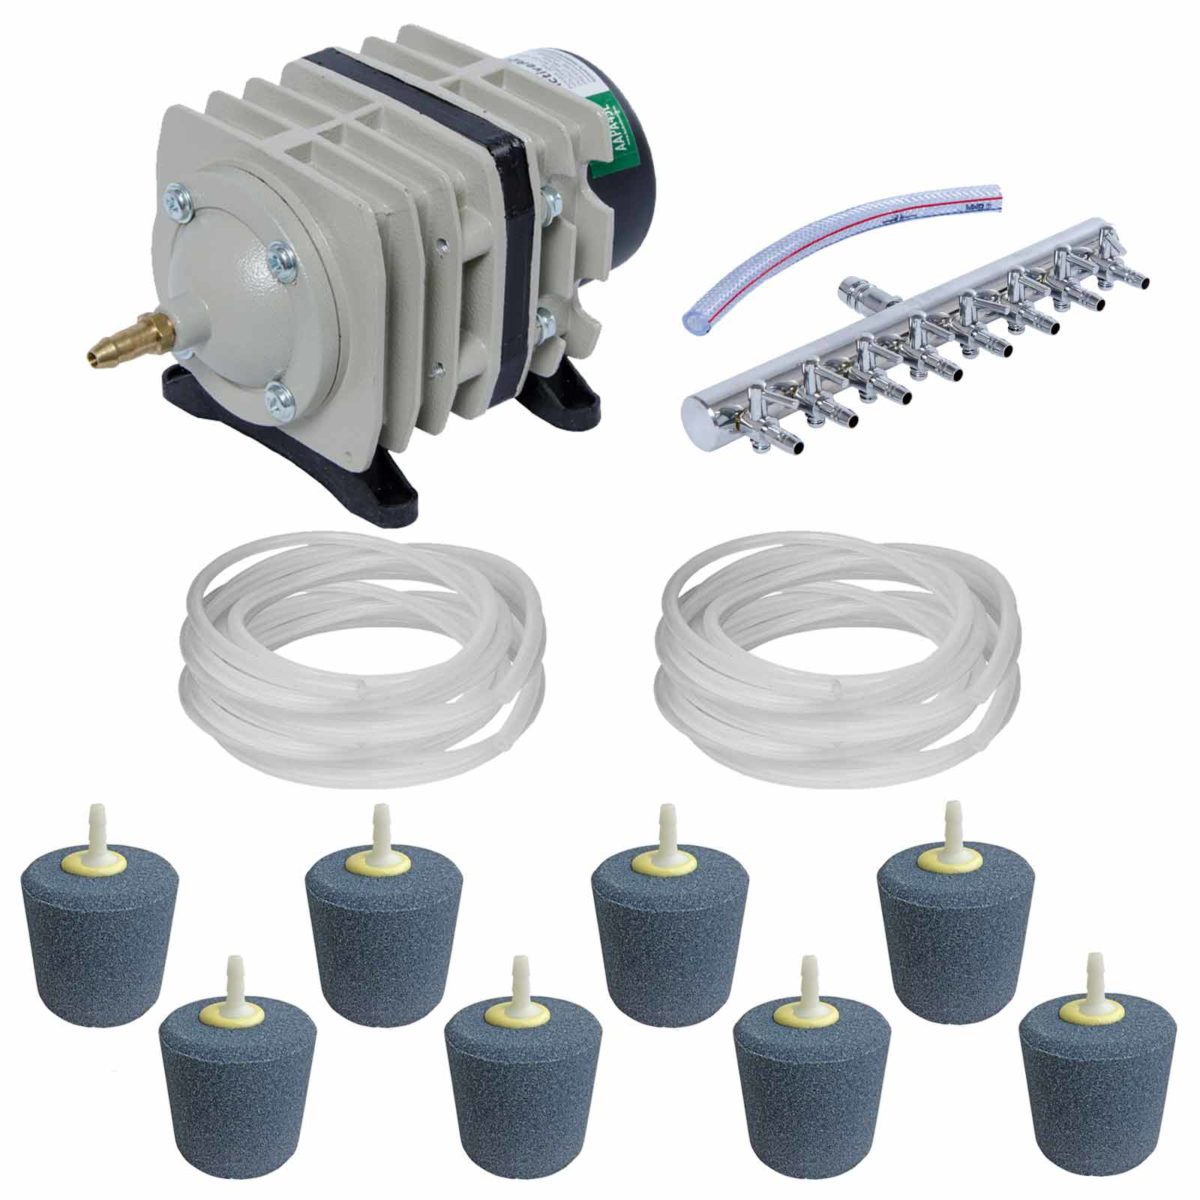 An TAS AquaAeration Kit with 8 Outlet Pump set with silicone tubing for aeration.